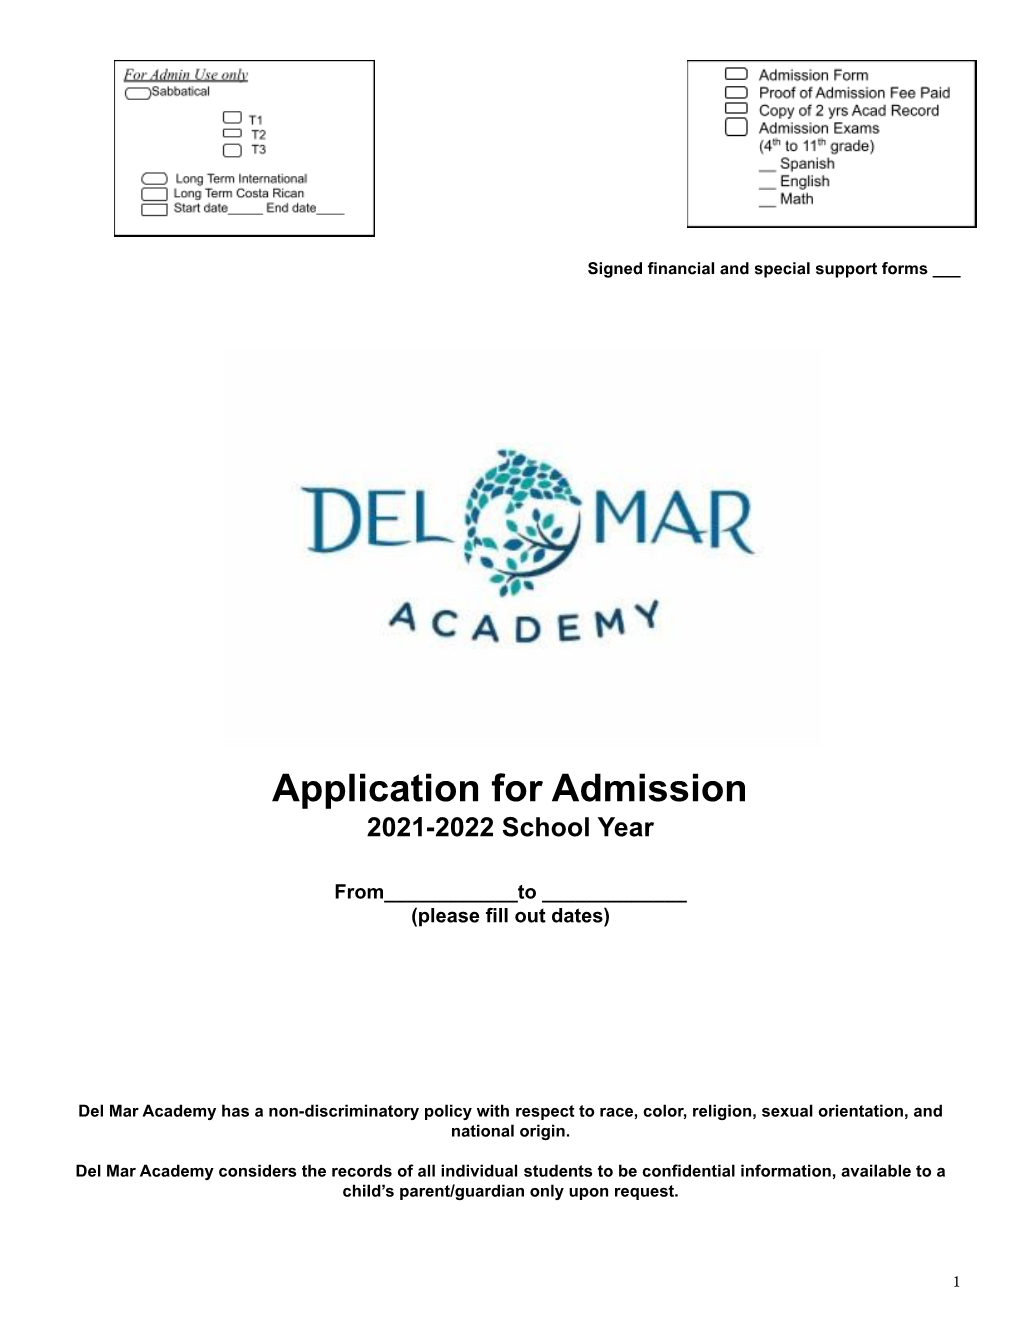 Application for Admission 2021-2022 School Year